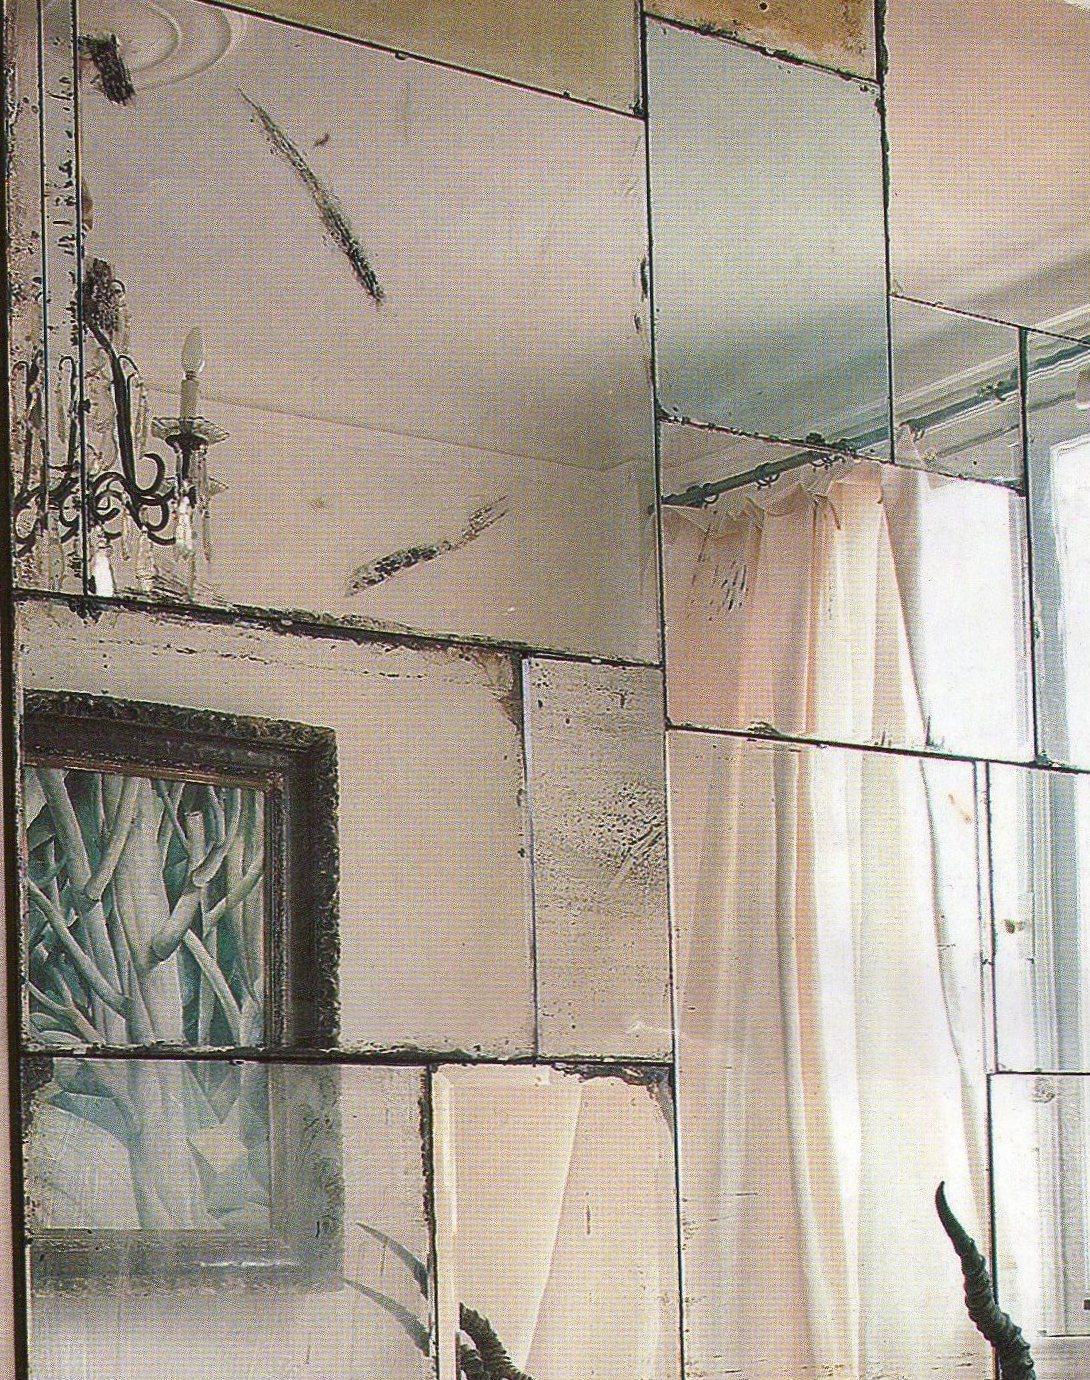 Rustic Industrial Custom-Made Artisanal Mirrors Hand-Aged Authentic Finish Frameless S For Sale